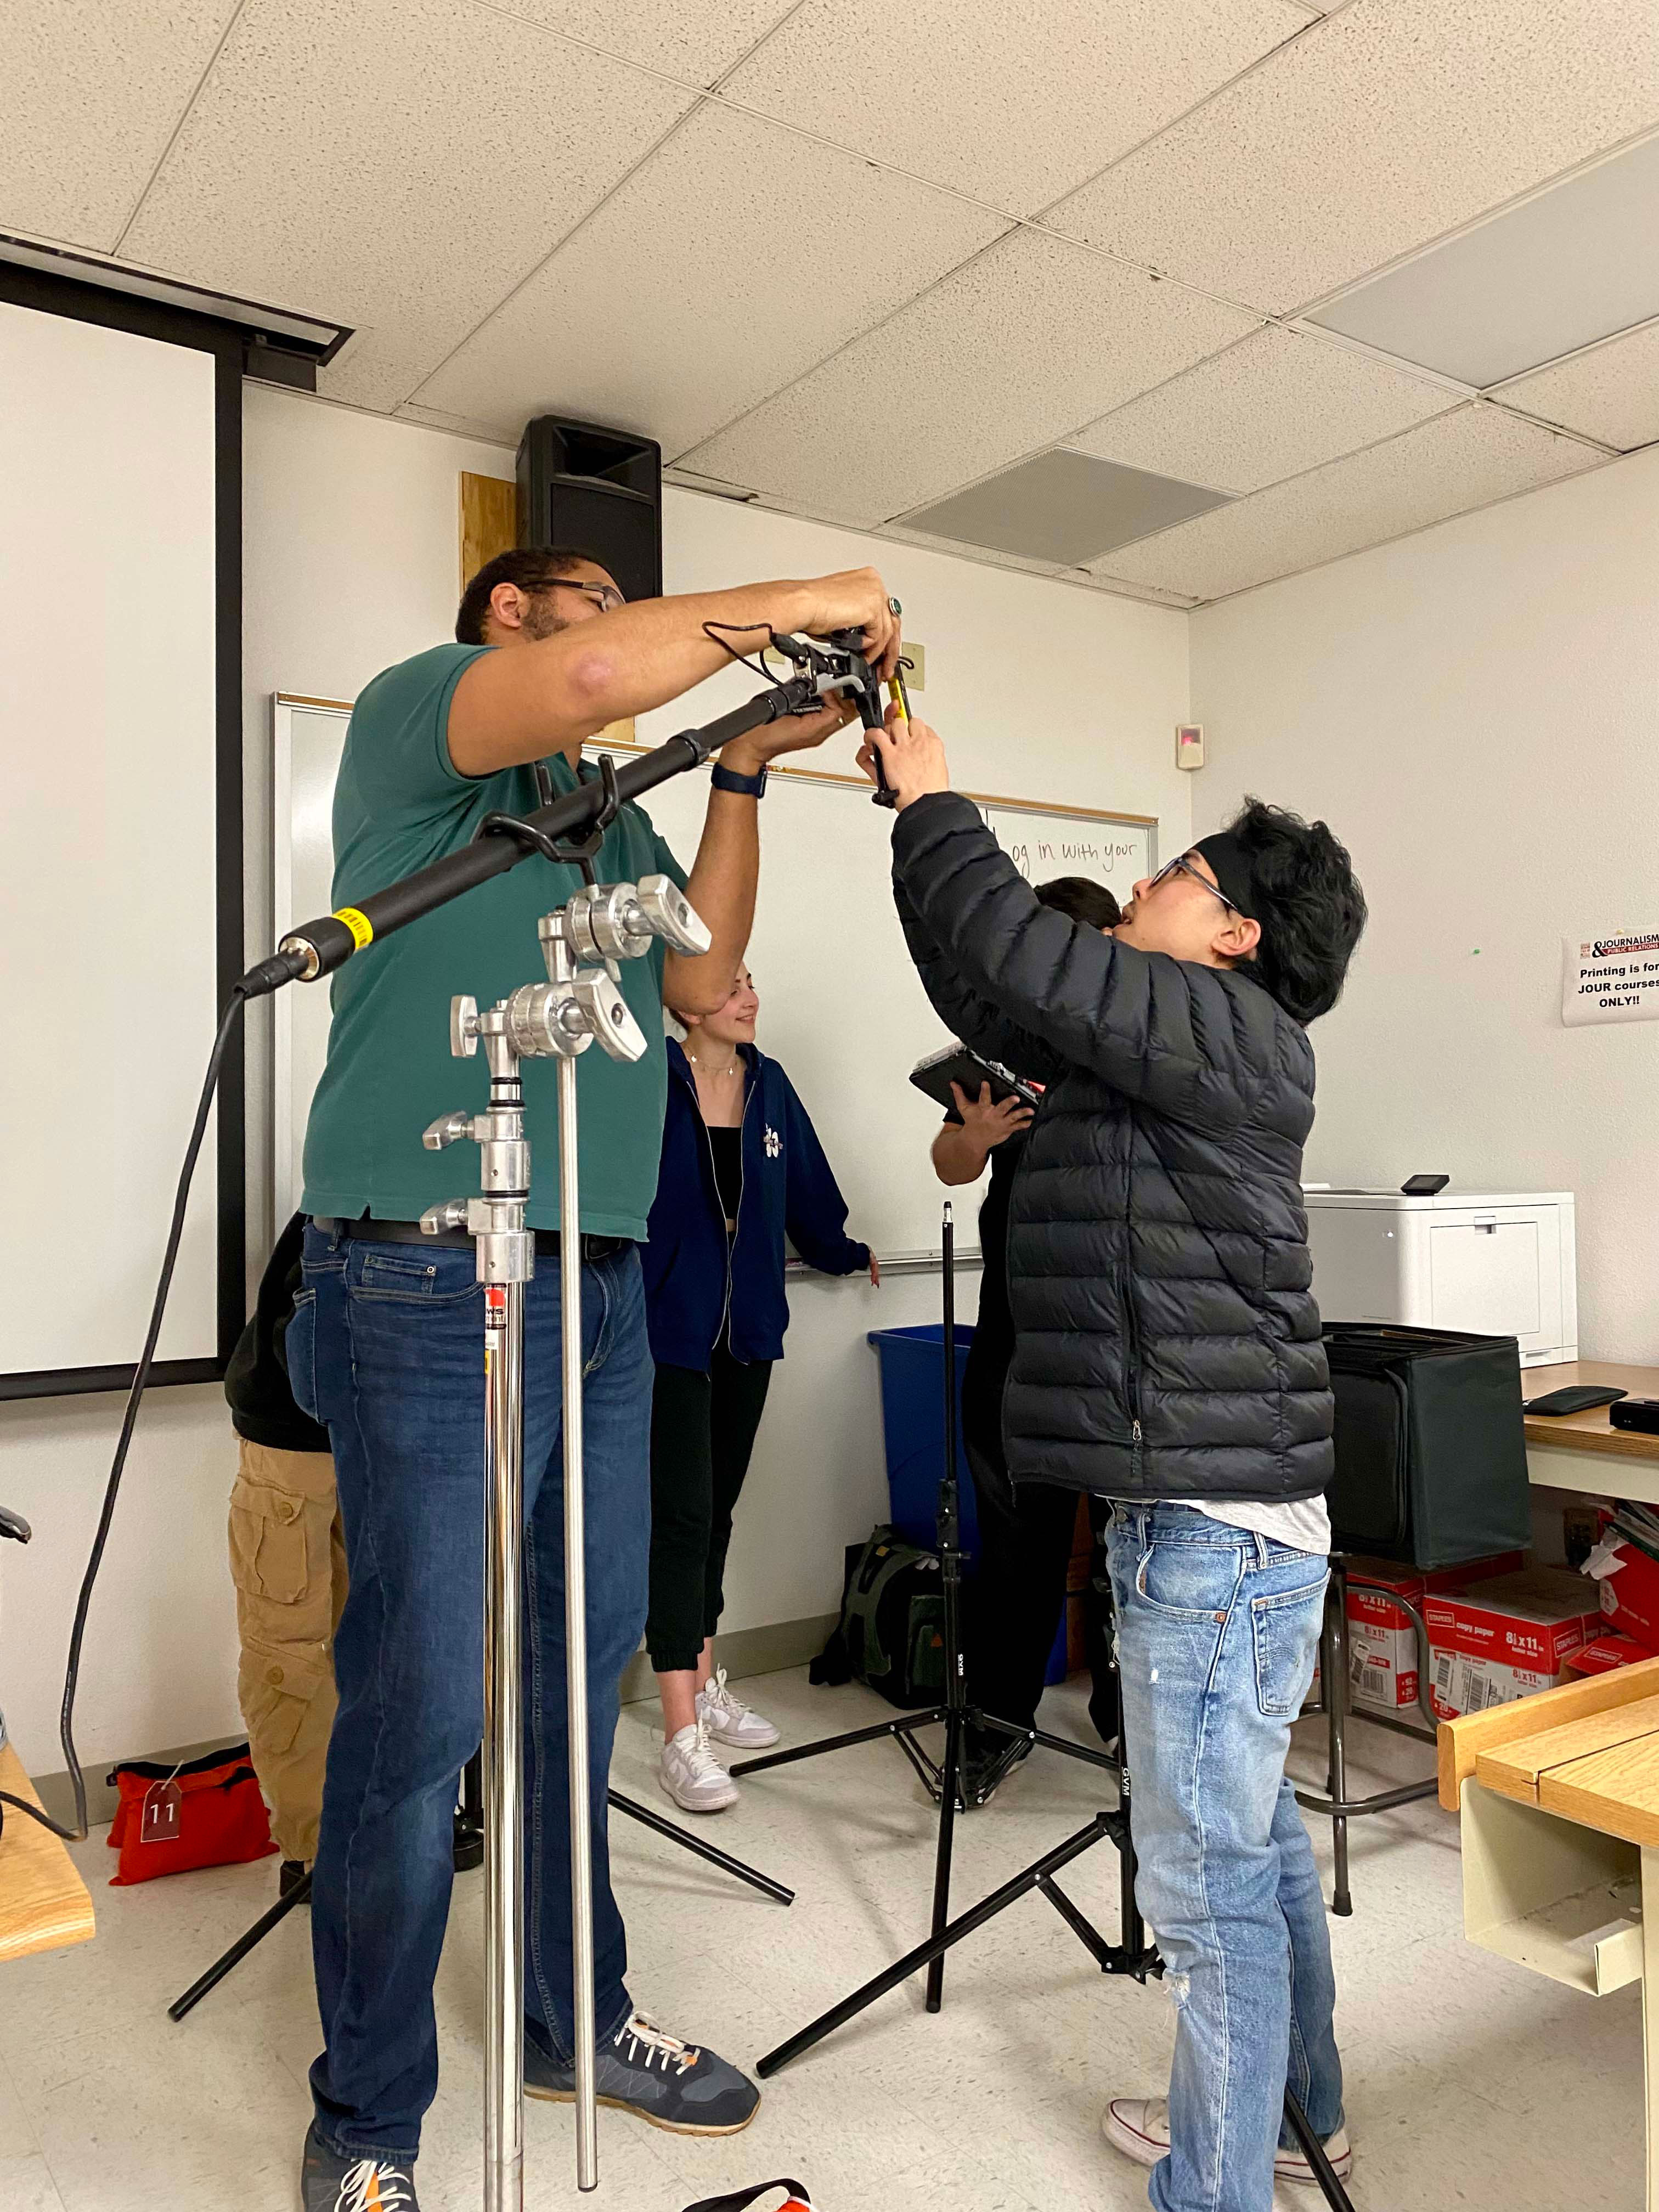 John Chiu working with Professor, Quinn Winchell, to set up the sound equipment.